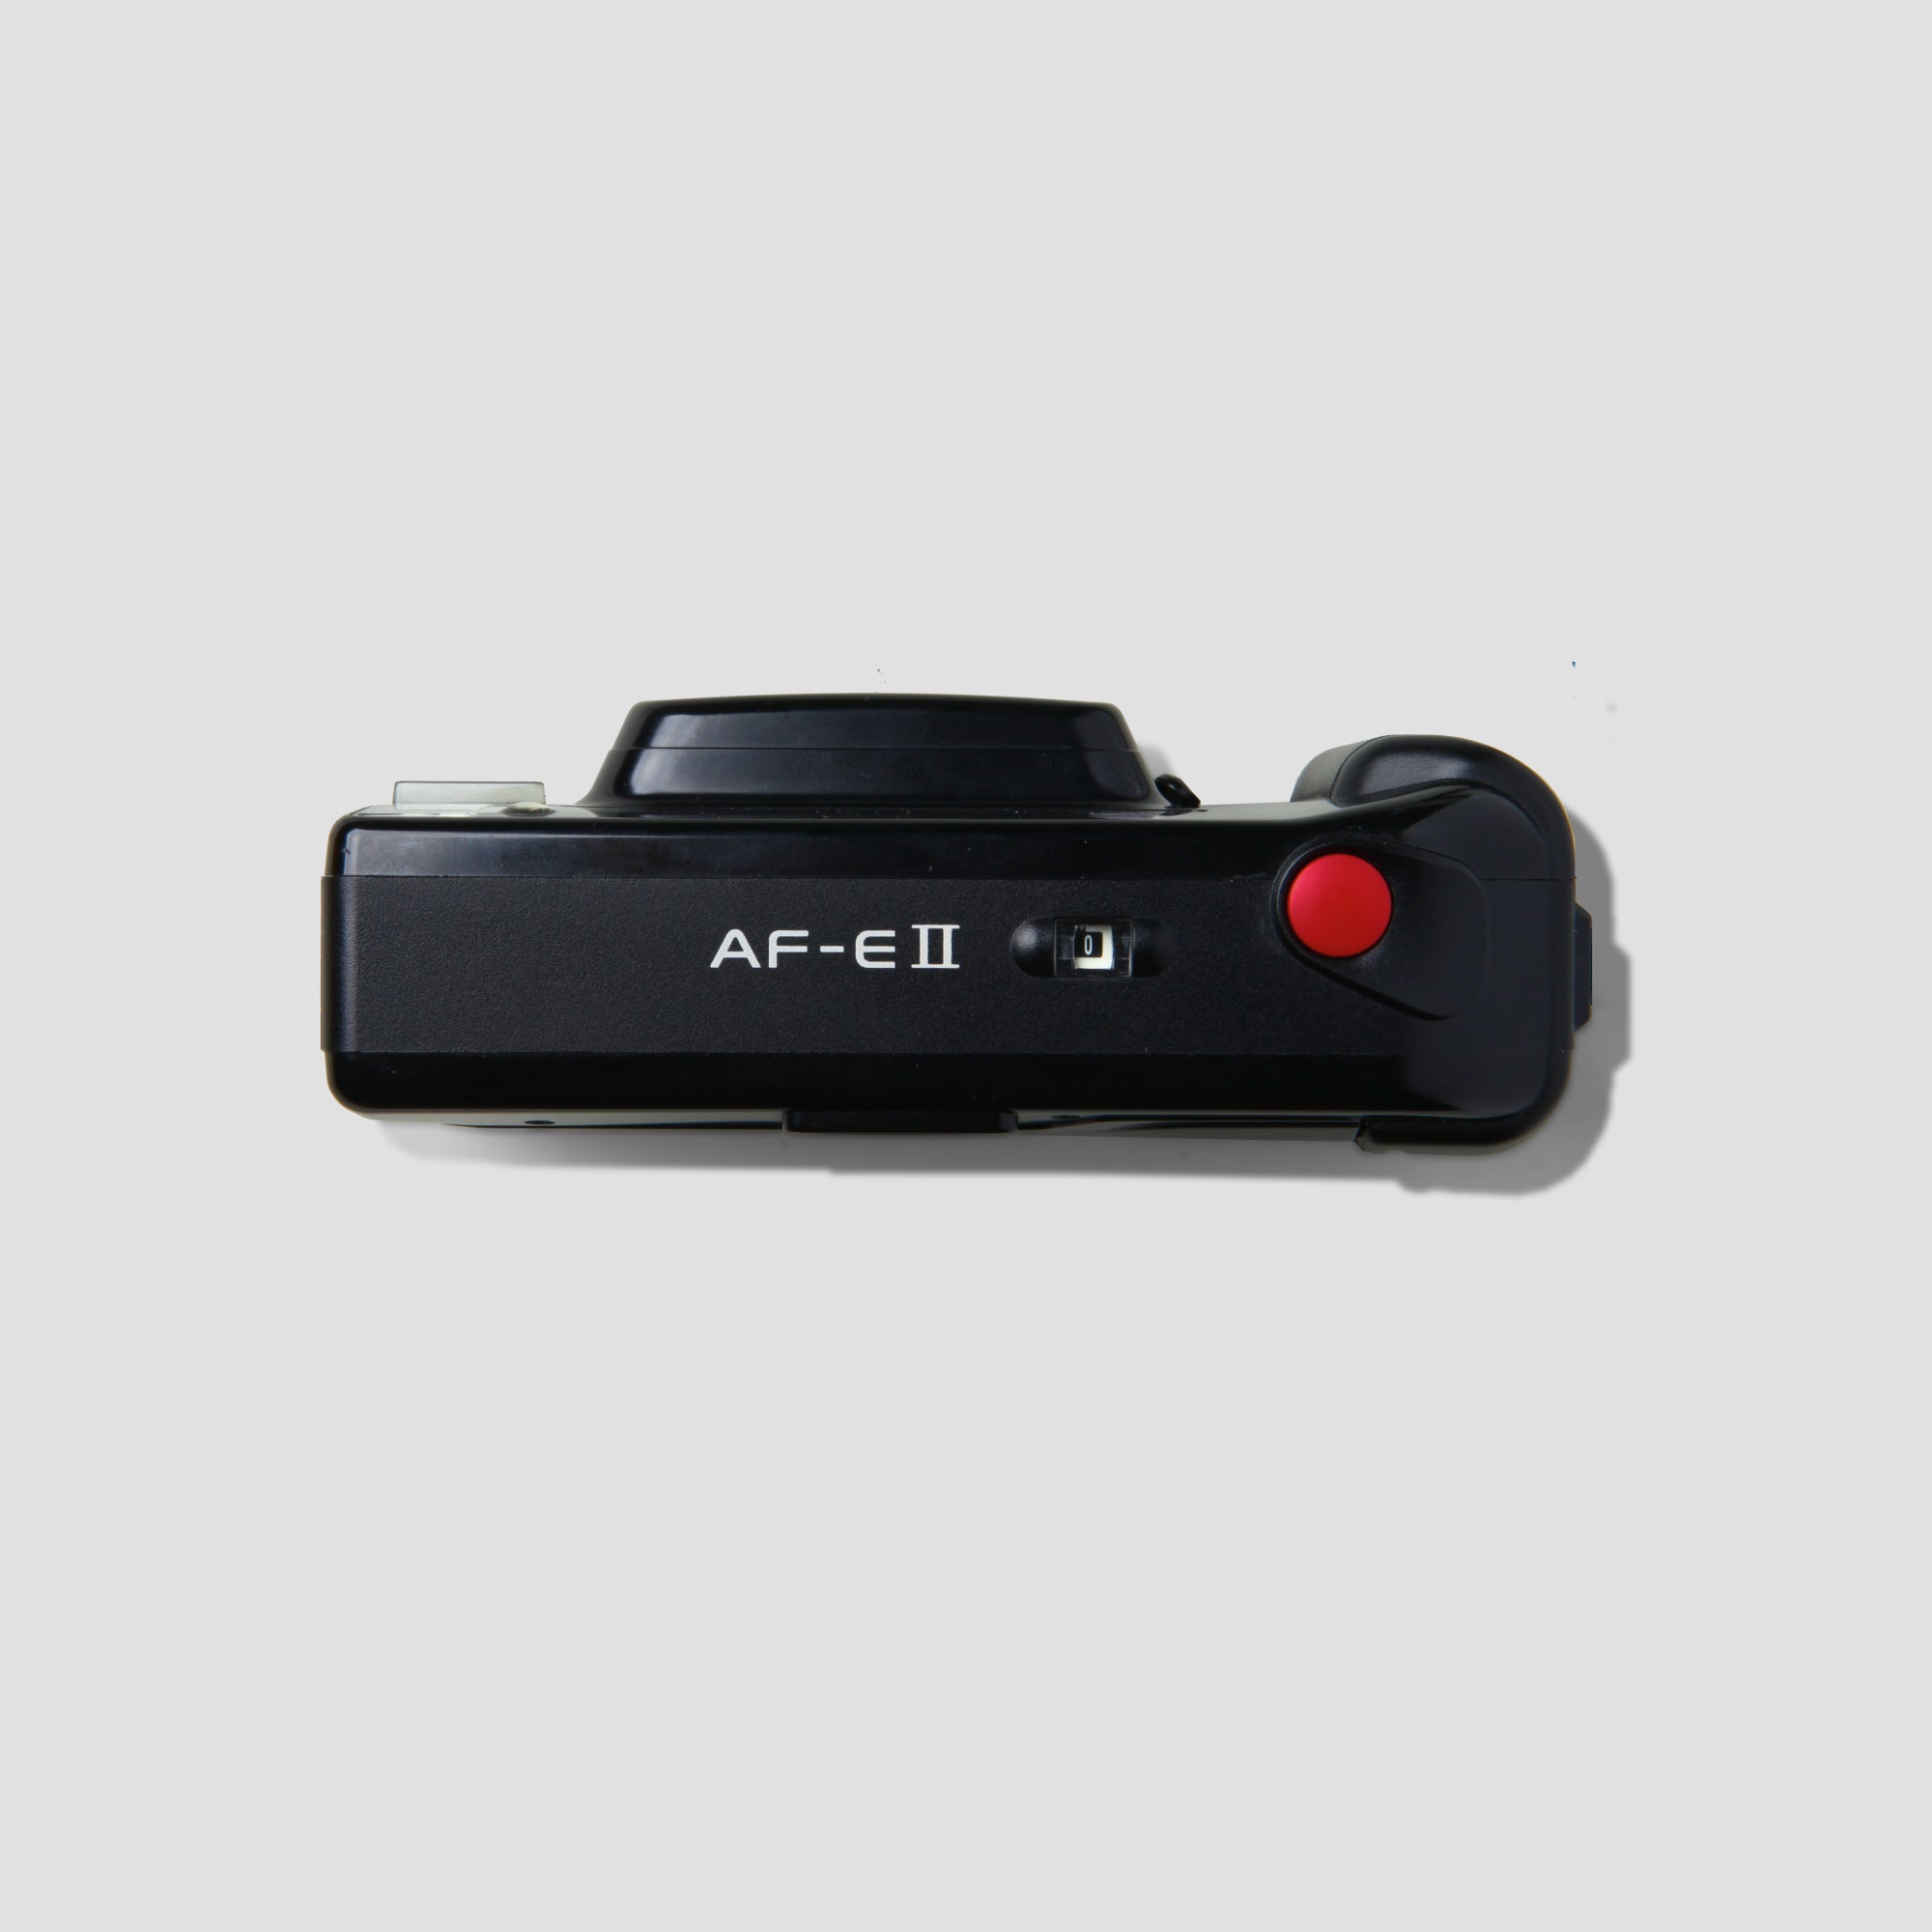 Buy Minolta AF-E II now at Analogue Amsterdam